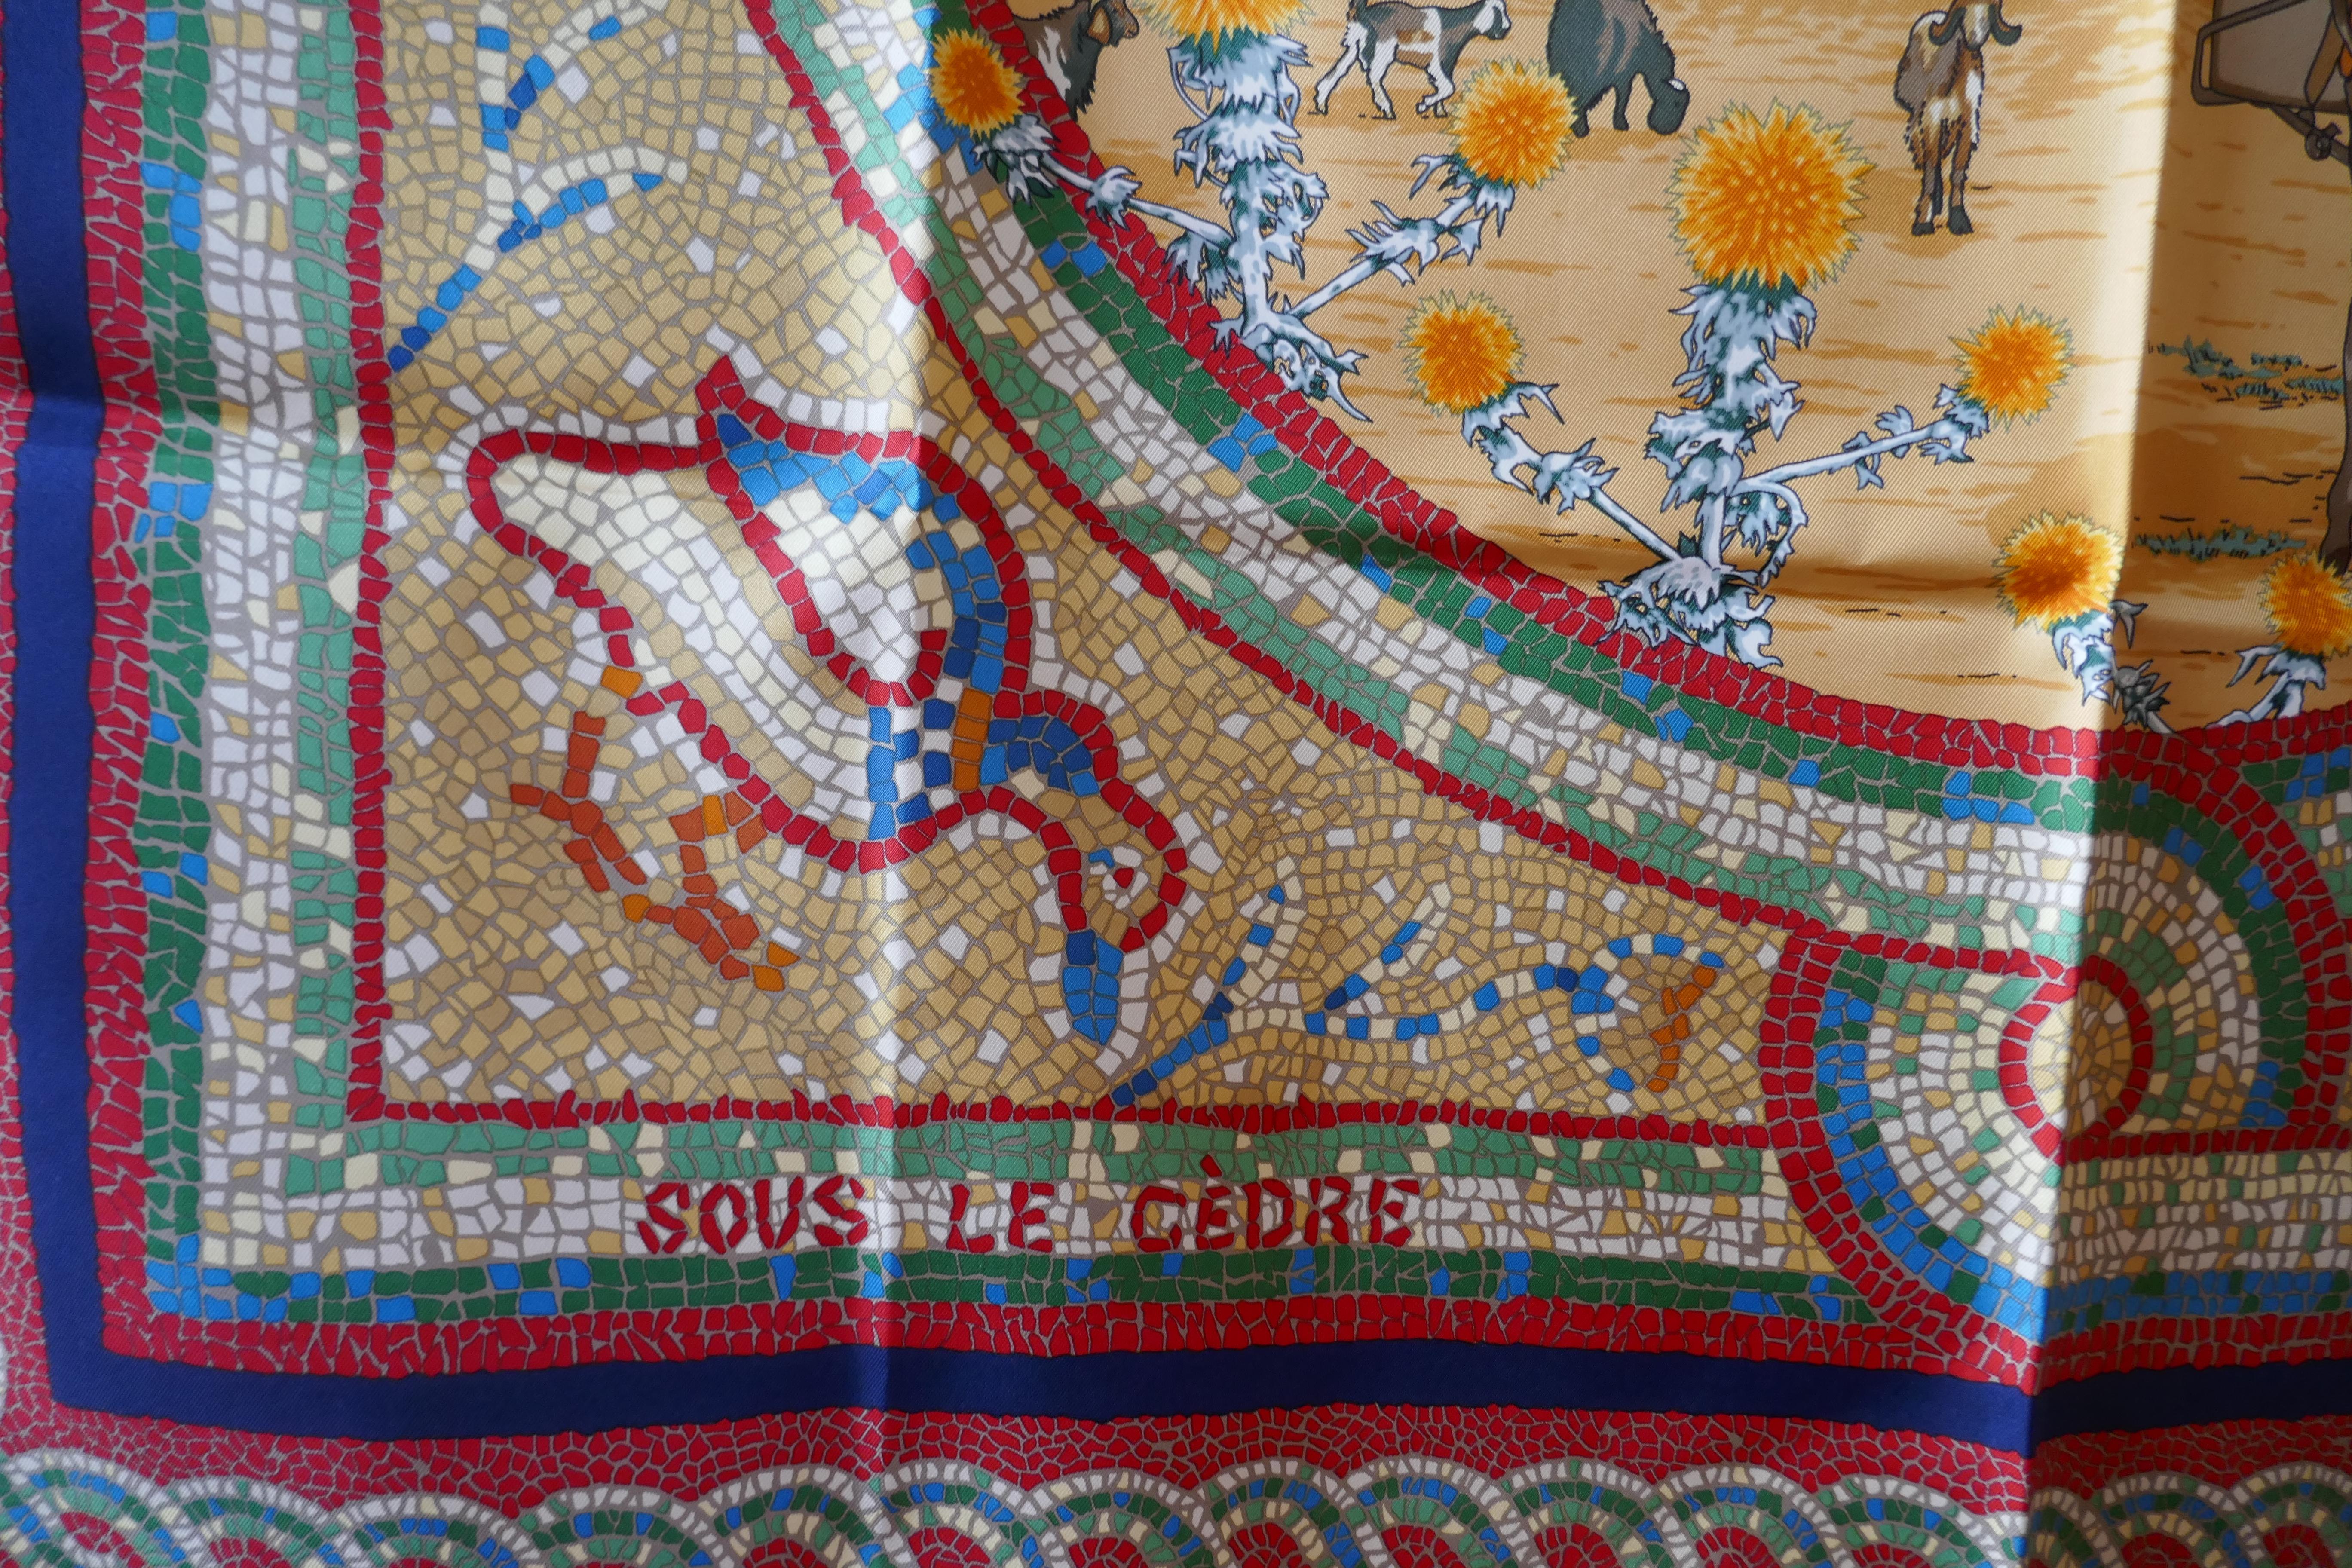 Hermes Silk Scarf “ Sous le Cedre” Design by Dimitri Rybaltchenko 

Smart, Luxurious, Authentic un worn original Hermes Silk Scarf, “In the shade of the African tree”,  with mosaic border
Wonderful design from 2011, the designer's signature and the